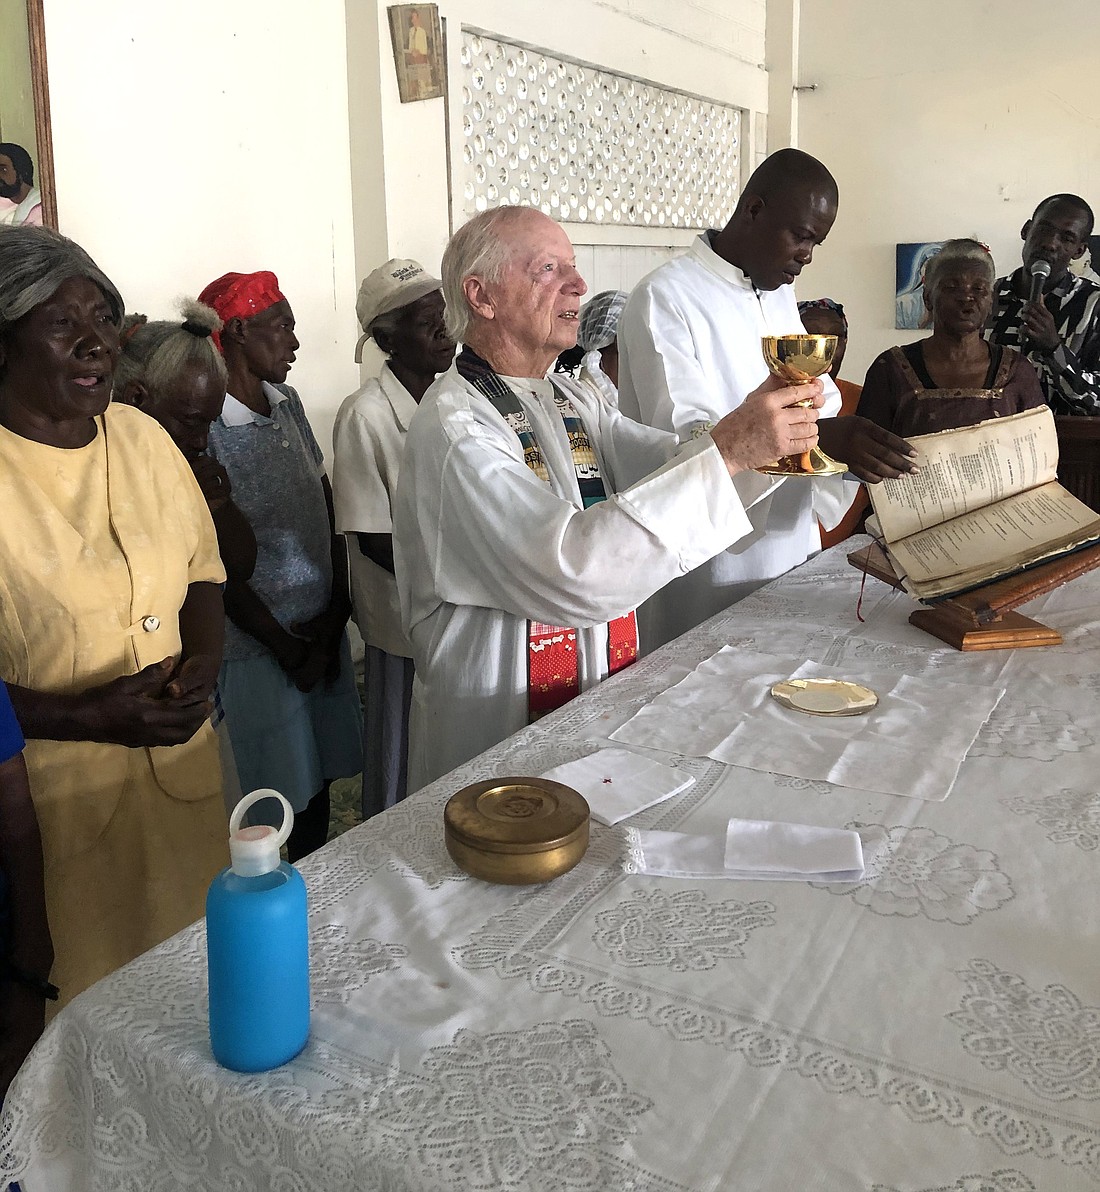 In this undated photo, Father Thomas Hagan, an Oblate of St. Francis de Sales, celebrates Mass in Cité Soleil, Haiti, which is served by the nonprofit ministry he founded called Hands Together. (OSV News photo/Hands Together)